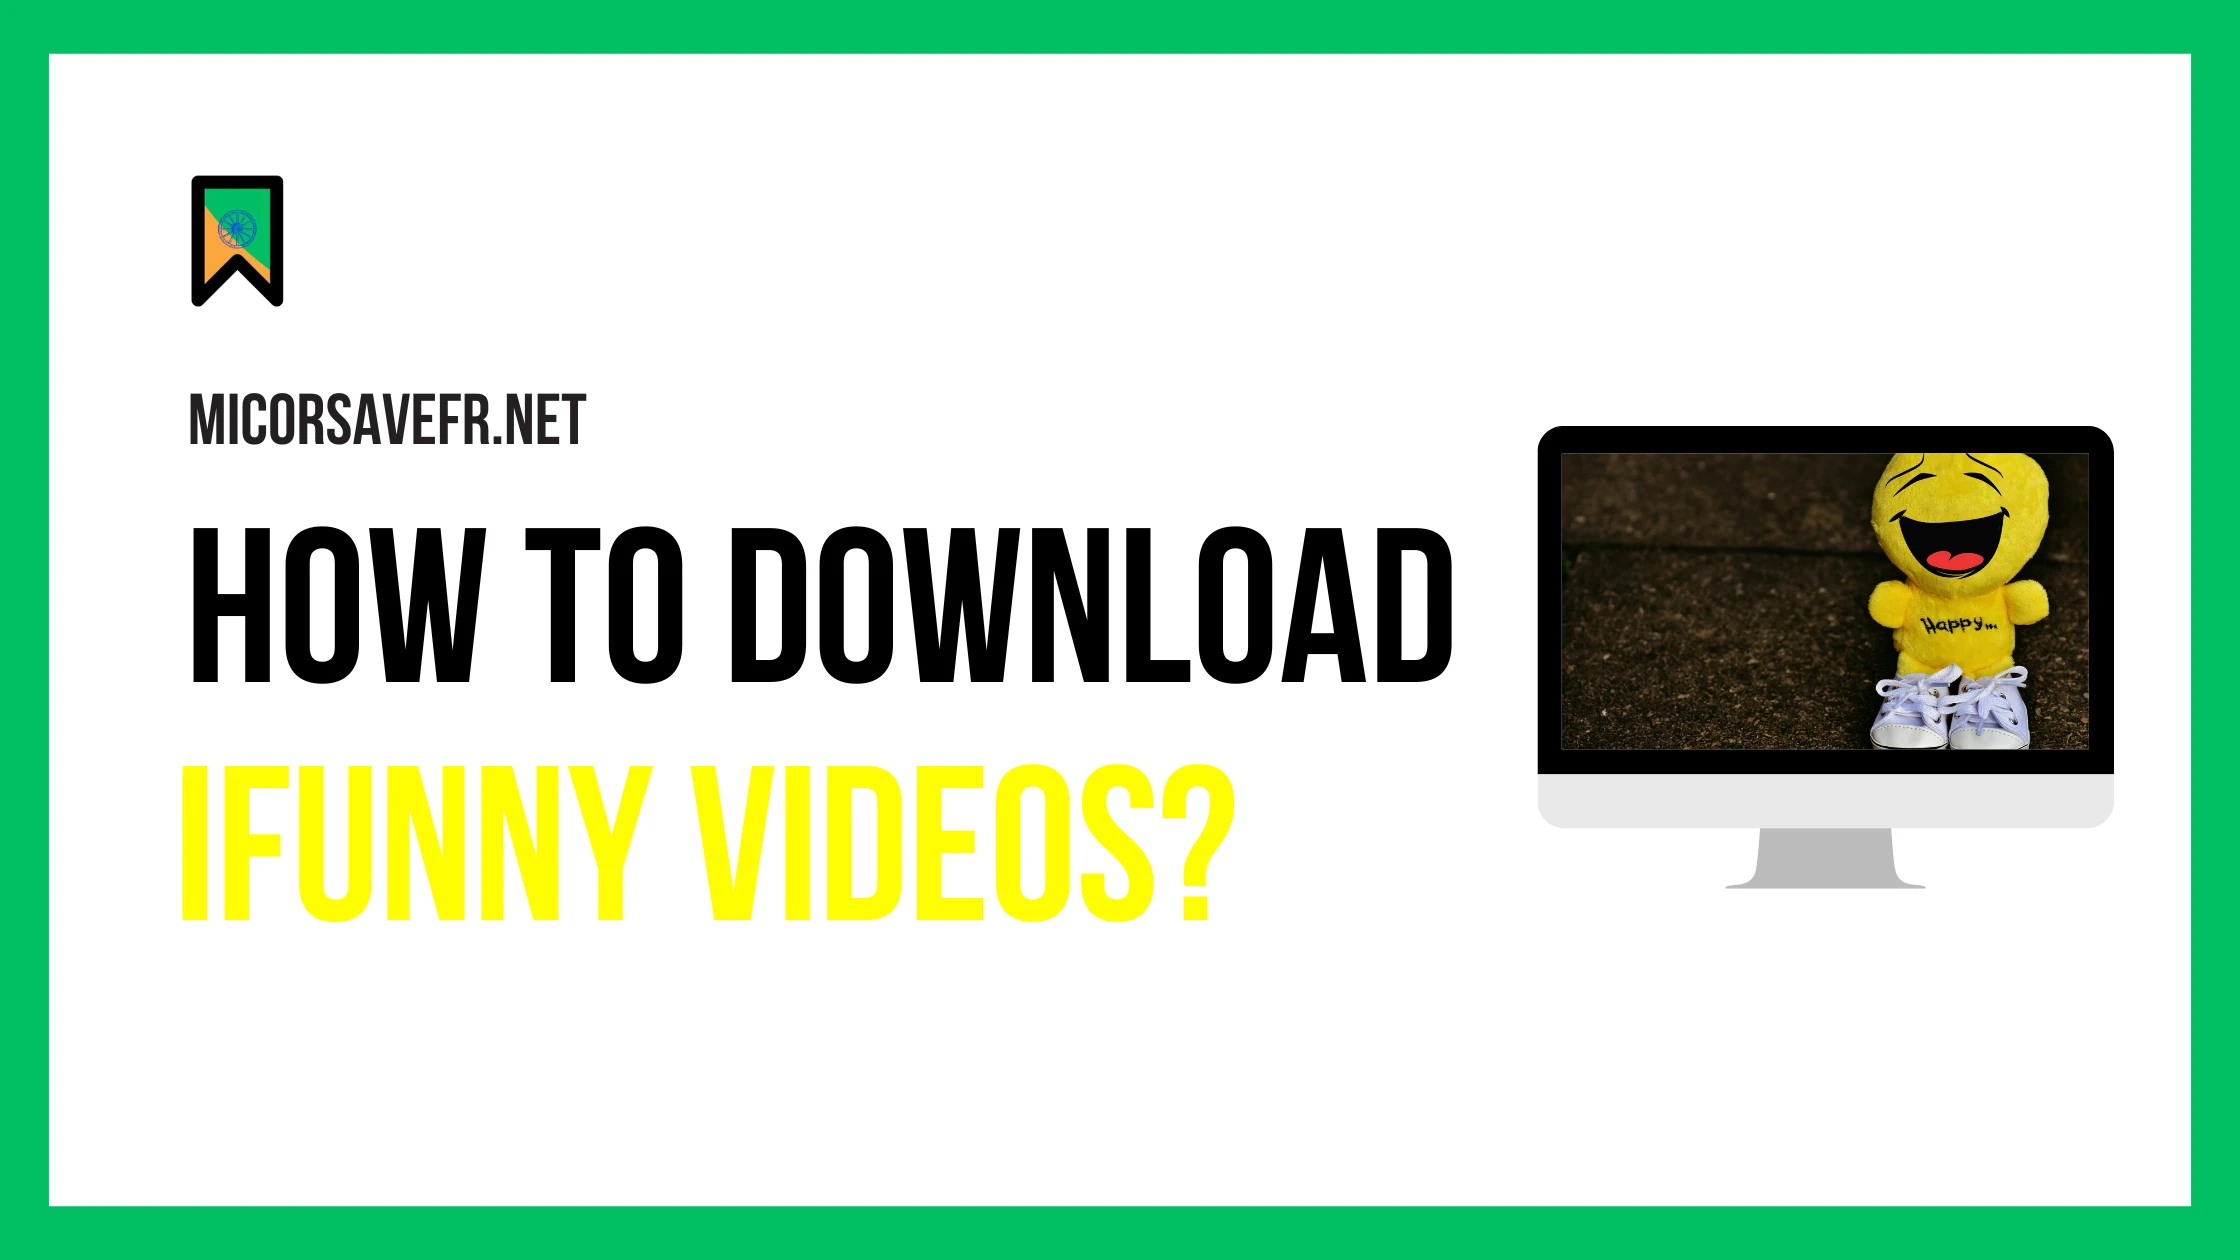 How To Download Ifunny Videos?